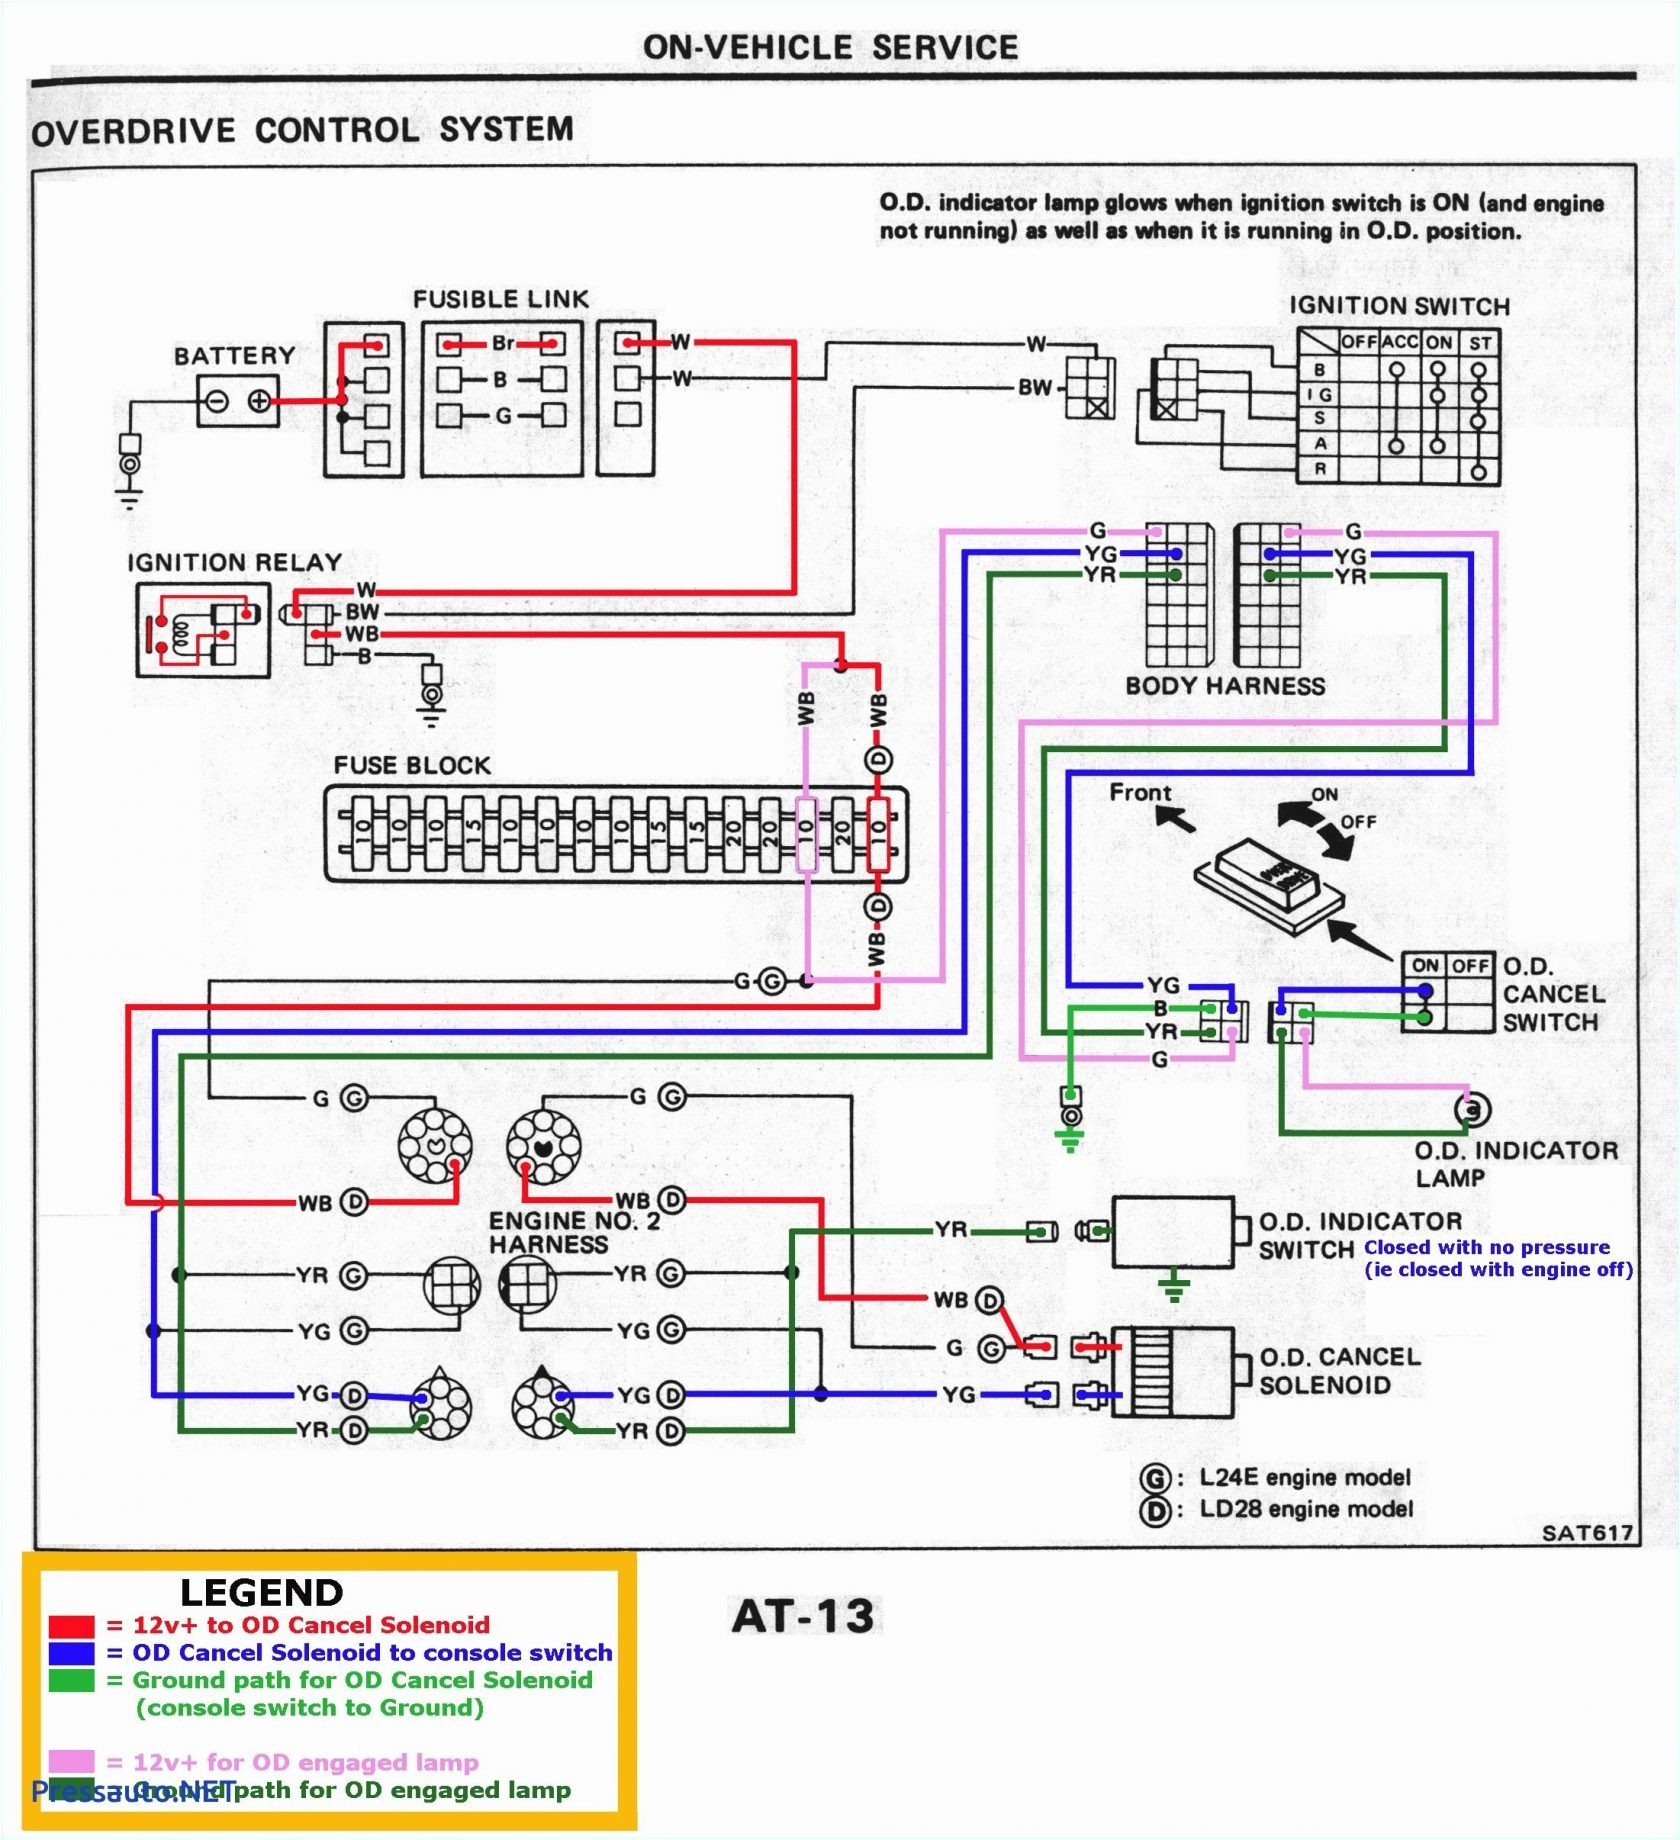 2011 Jeep Patriot Wiring Diagram Chevy Truck Trailer Wiring Color Code Poli Fuse17